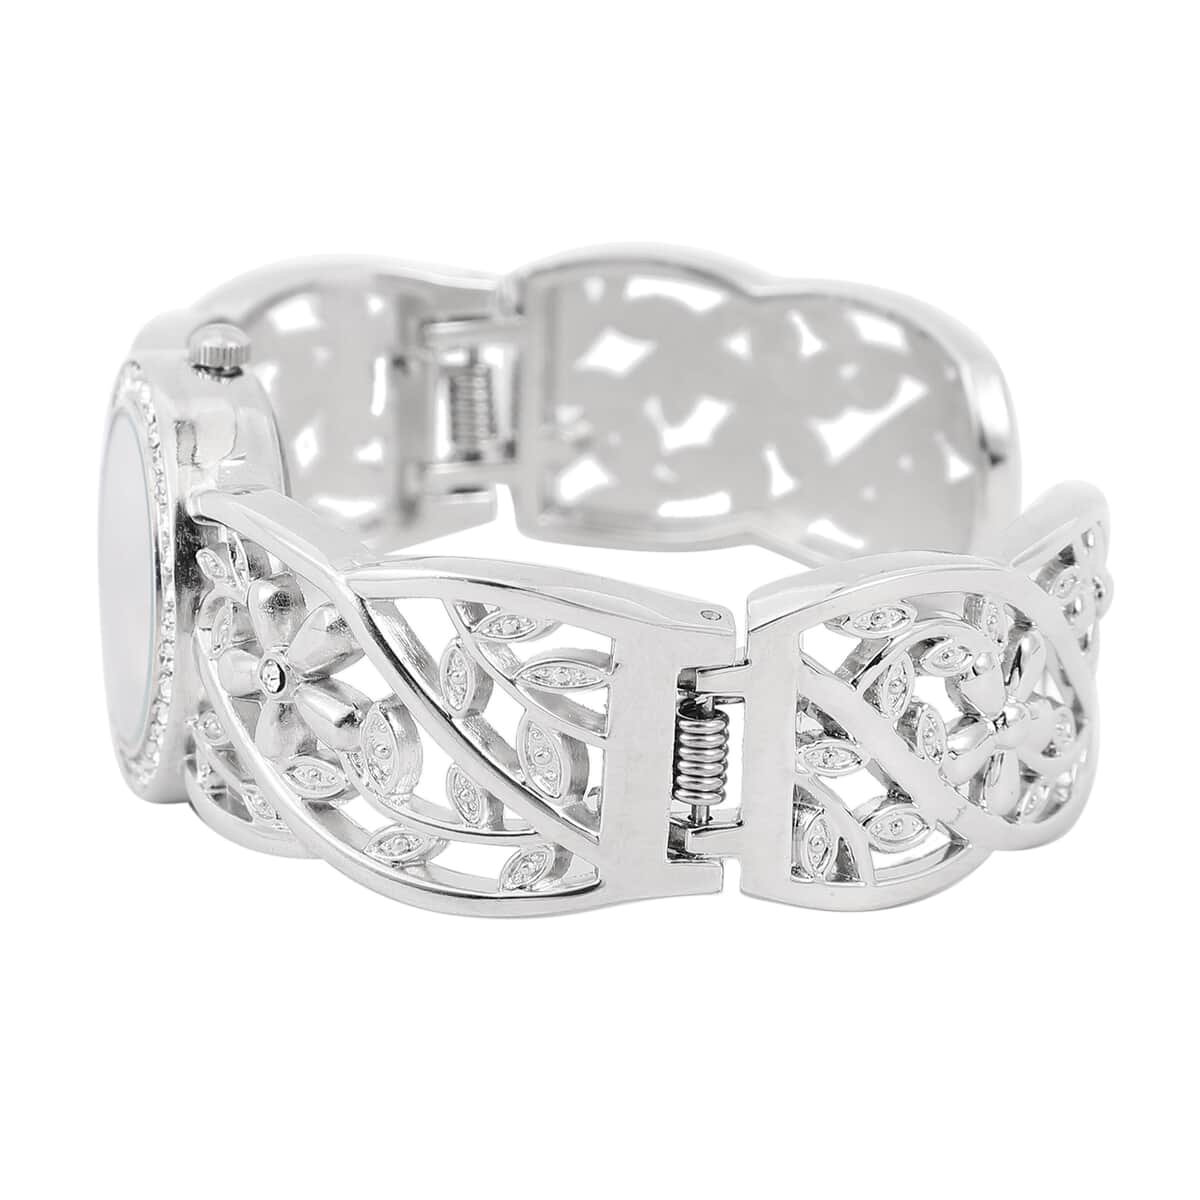 STRADA Austrian Crystal Japanese Movement Flower and Leaf Pattern Cuff Bracelet Watch in Silvertone  image number 4